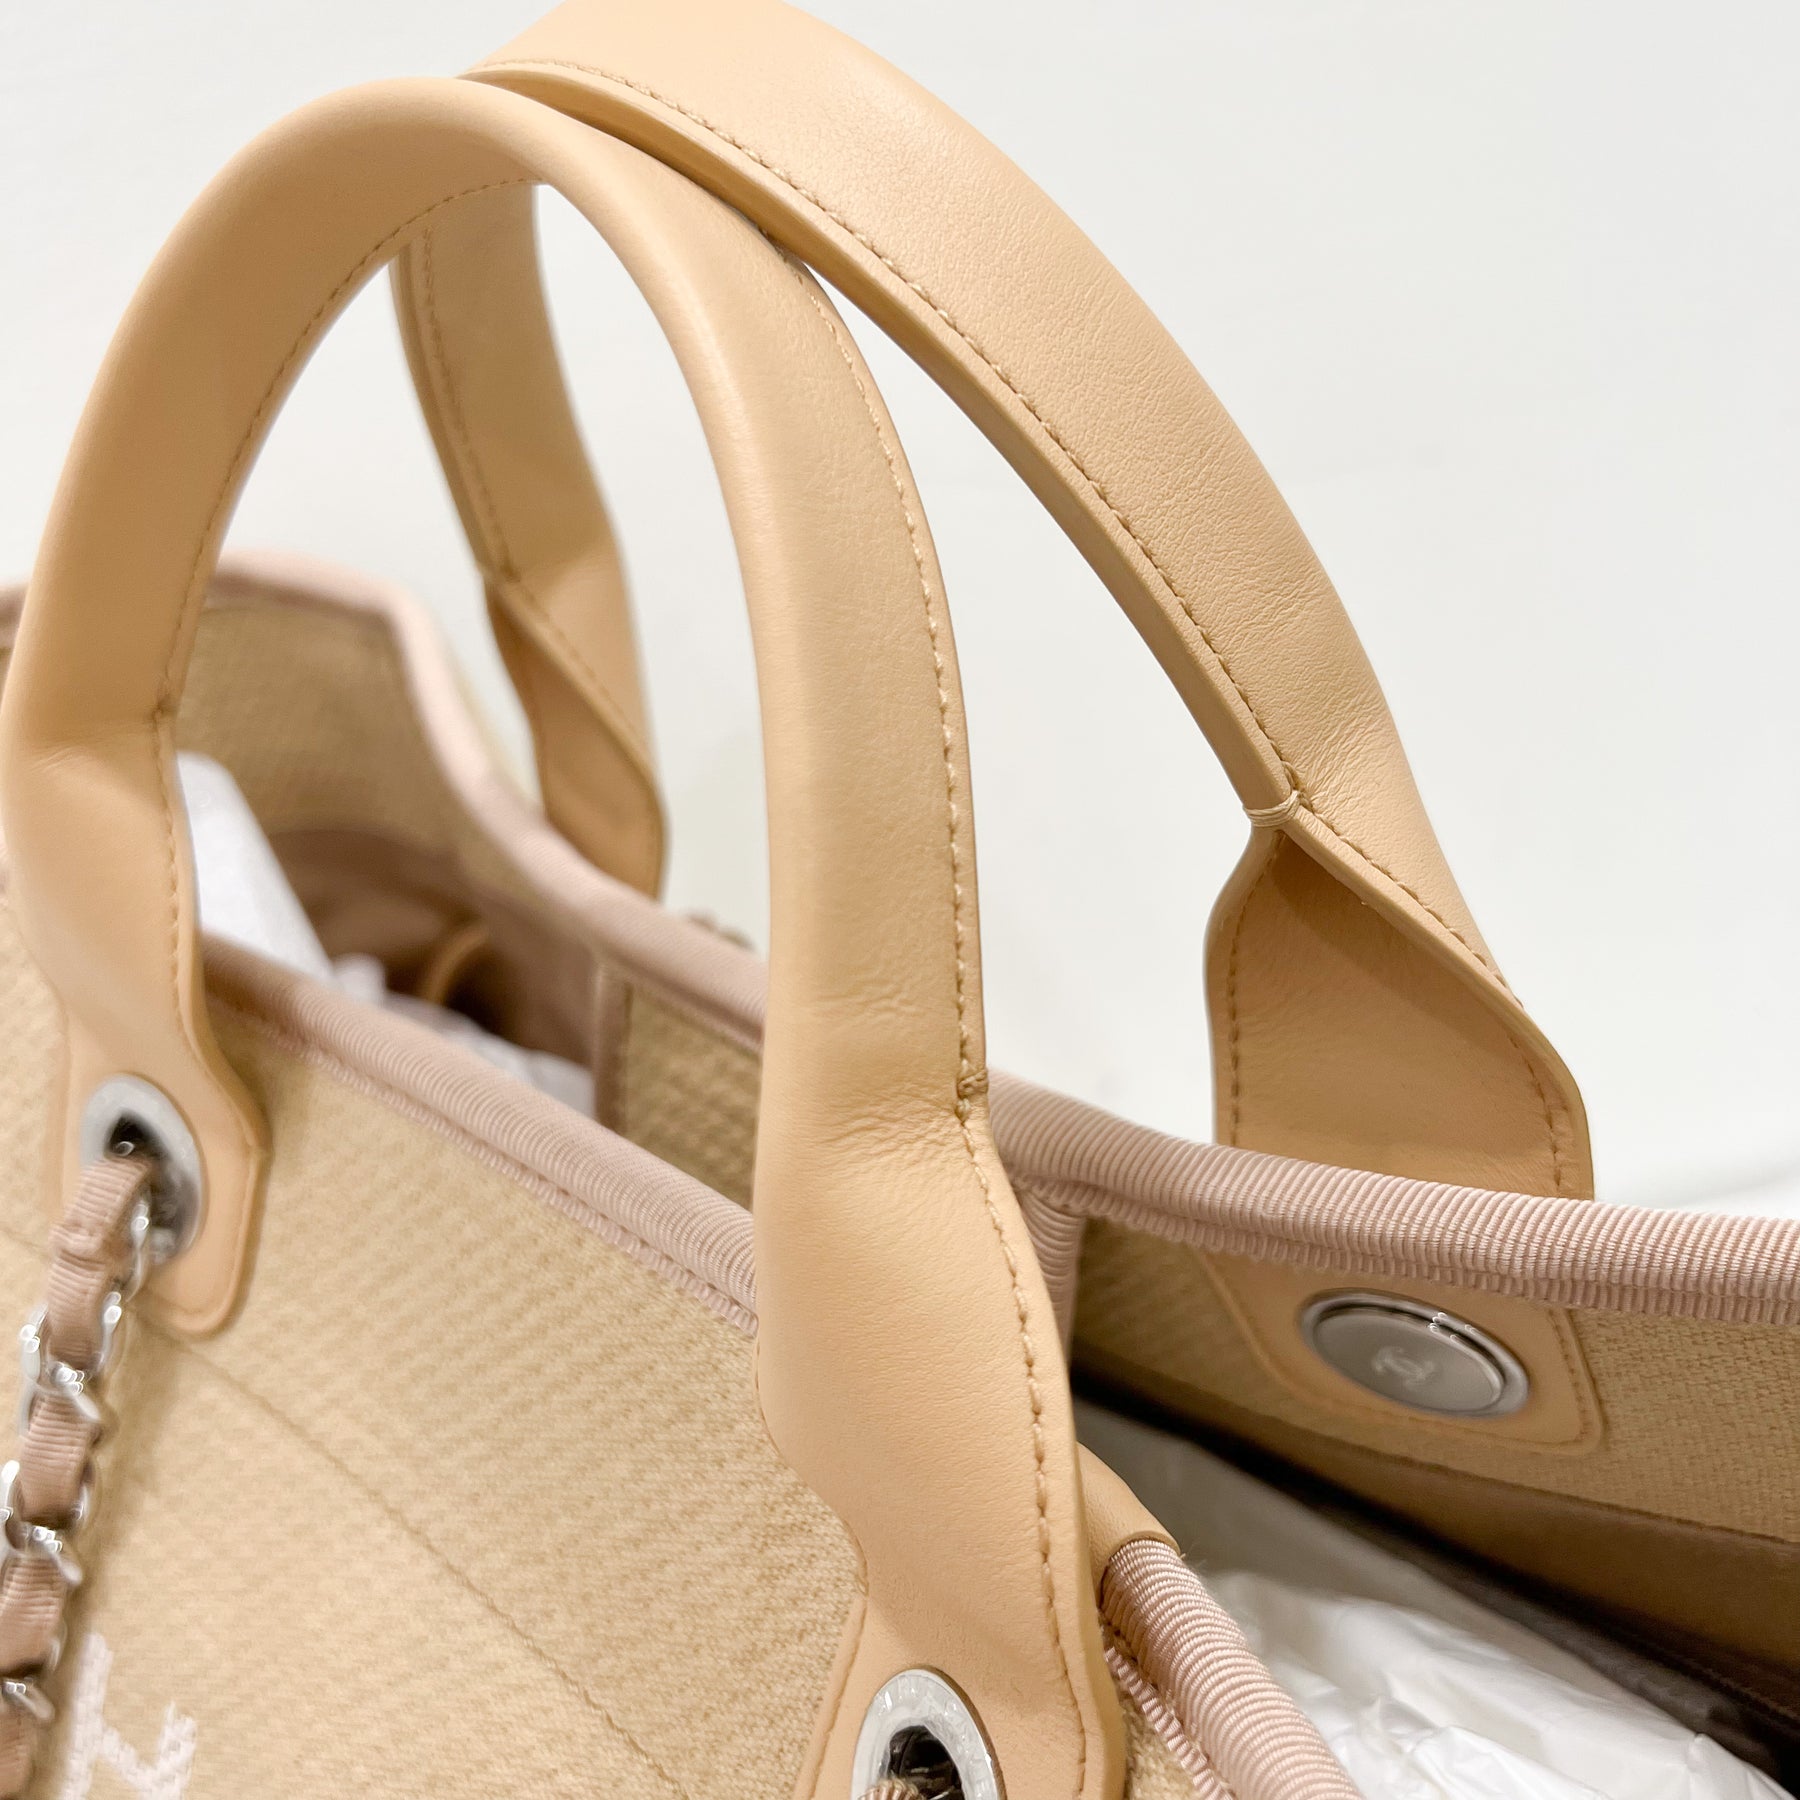 Chanel Large Deauville Tote in 22C Beige Fabric SHW – Brands Lover